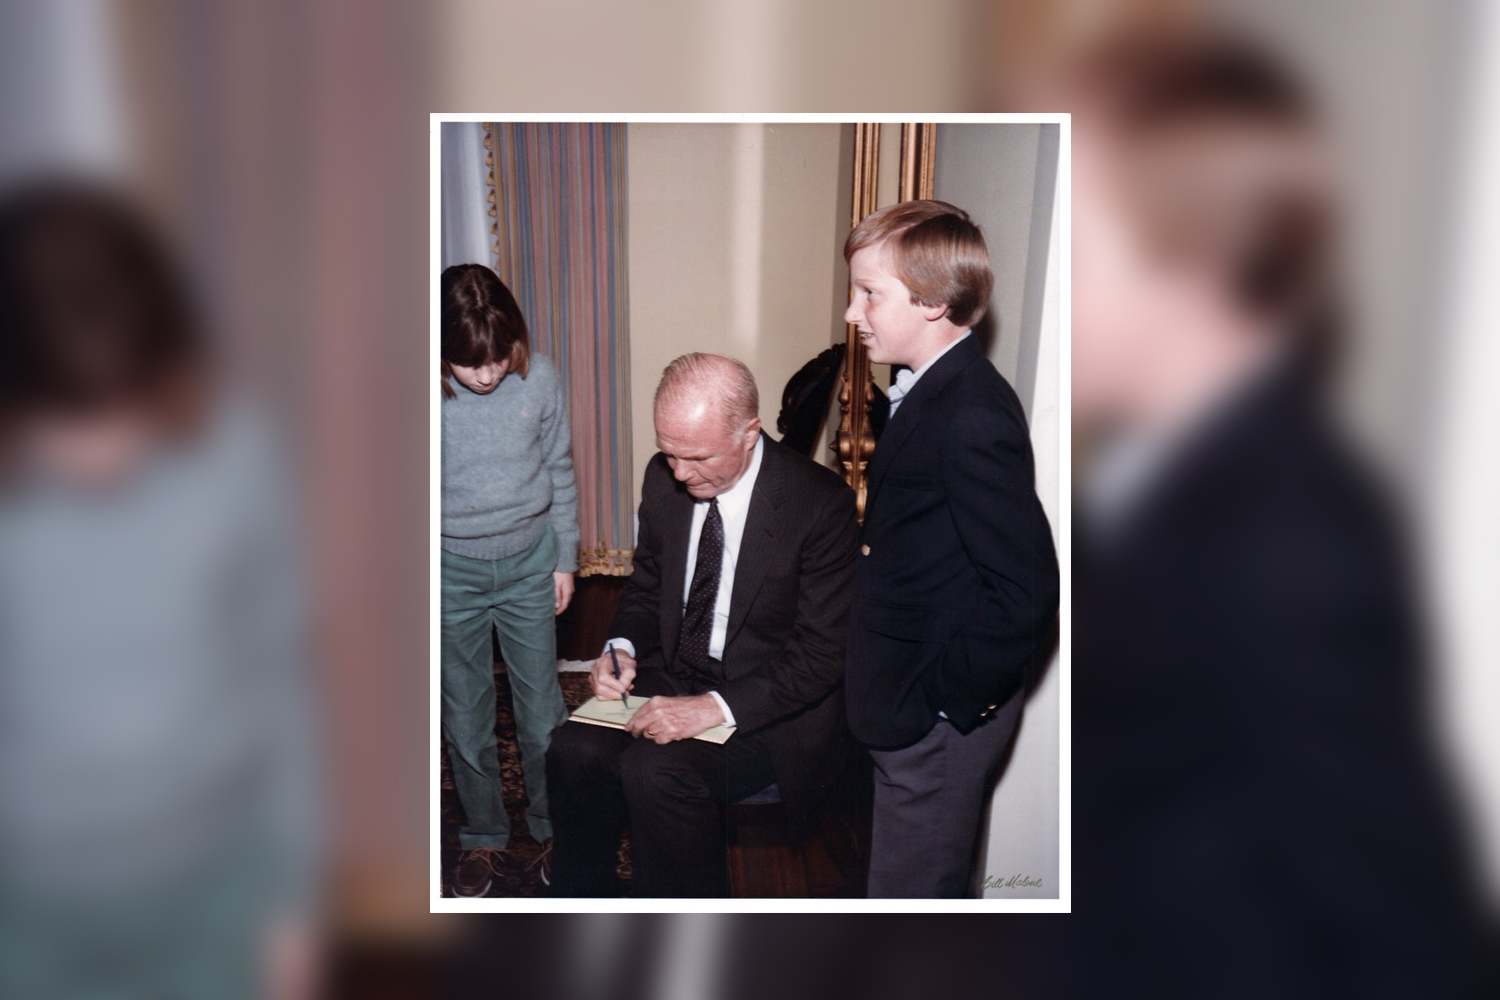 Andrew White, the son of former Gov. Mark White, is pictured at the Texas Governor's Mansion in 1979, waiting for astronaut John Glenn's signature.